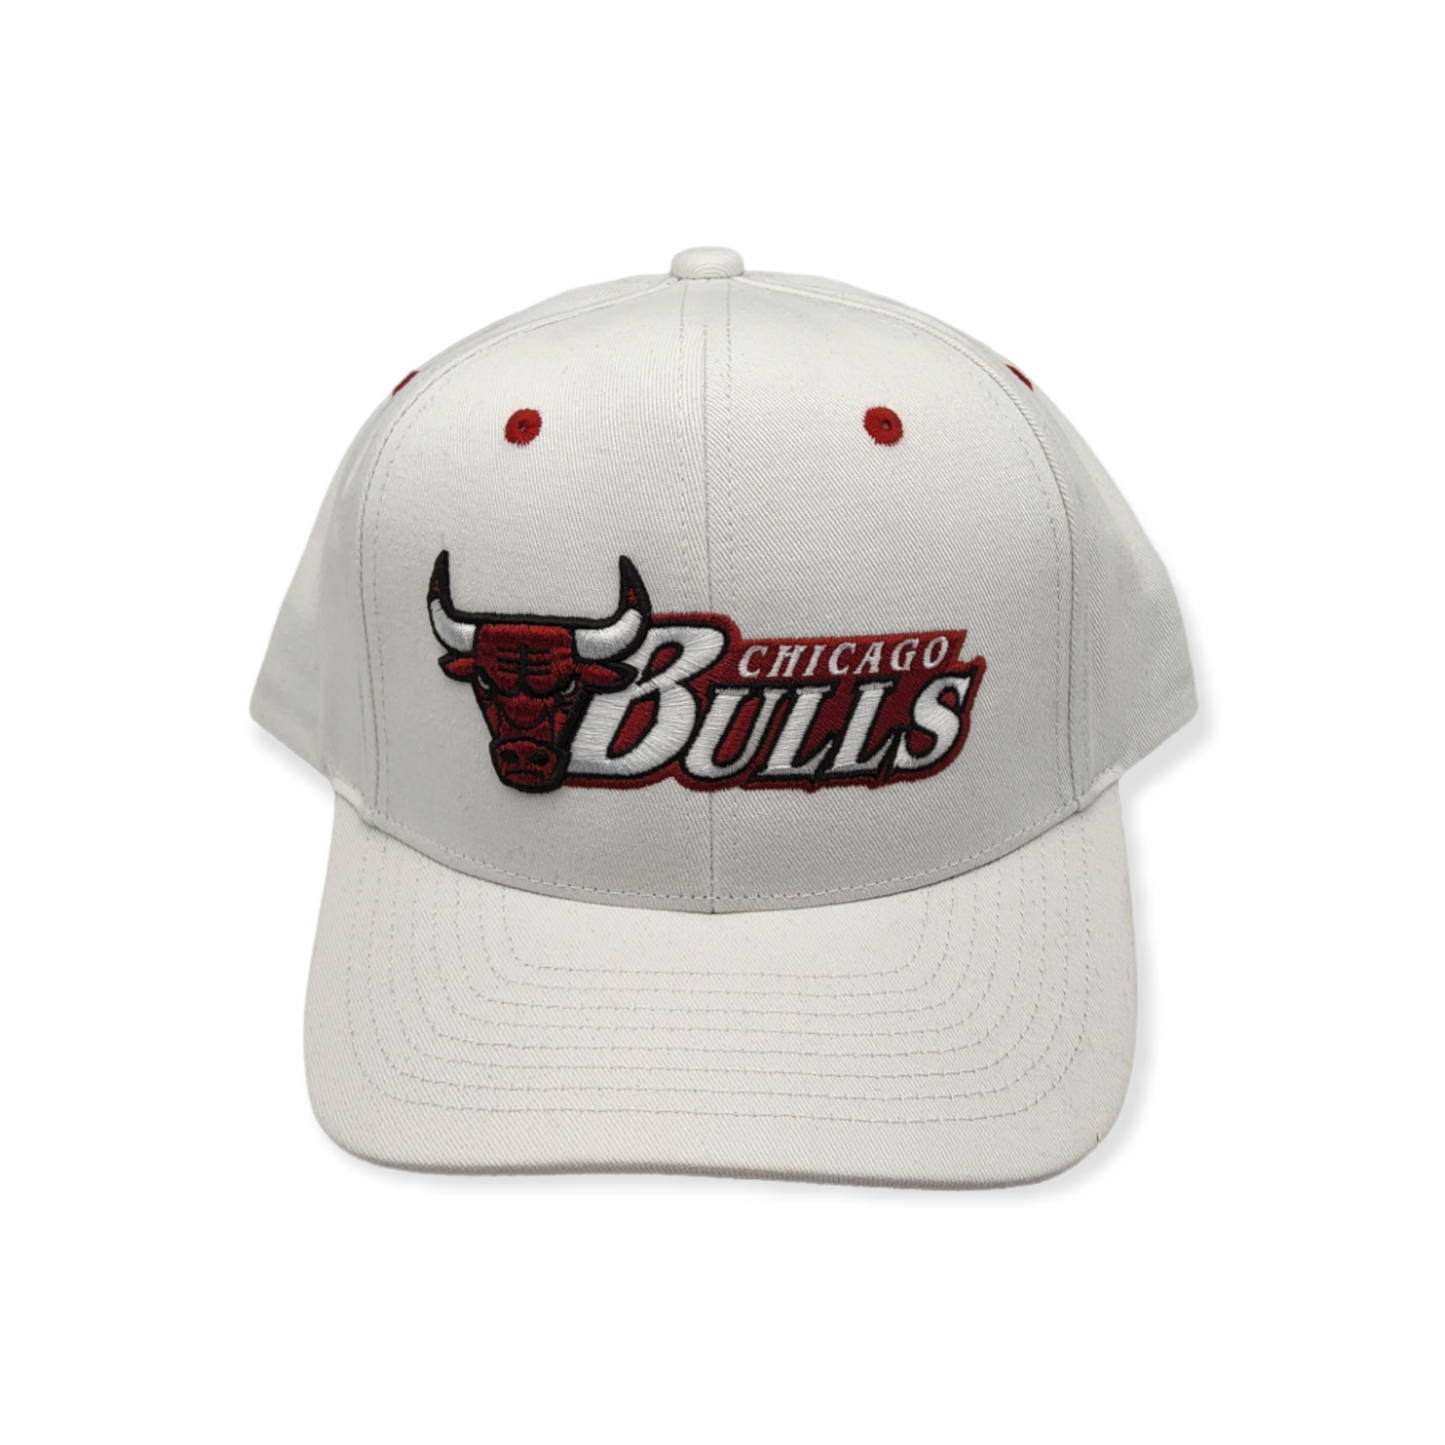 Mens Chicago Bulls NBA OH World Pro Curved Mitchell & Ness Snapback Hat